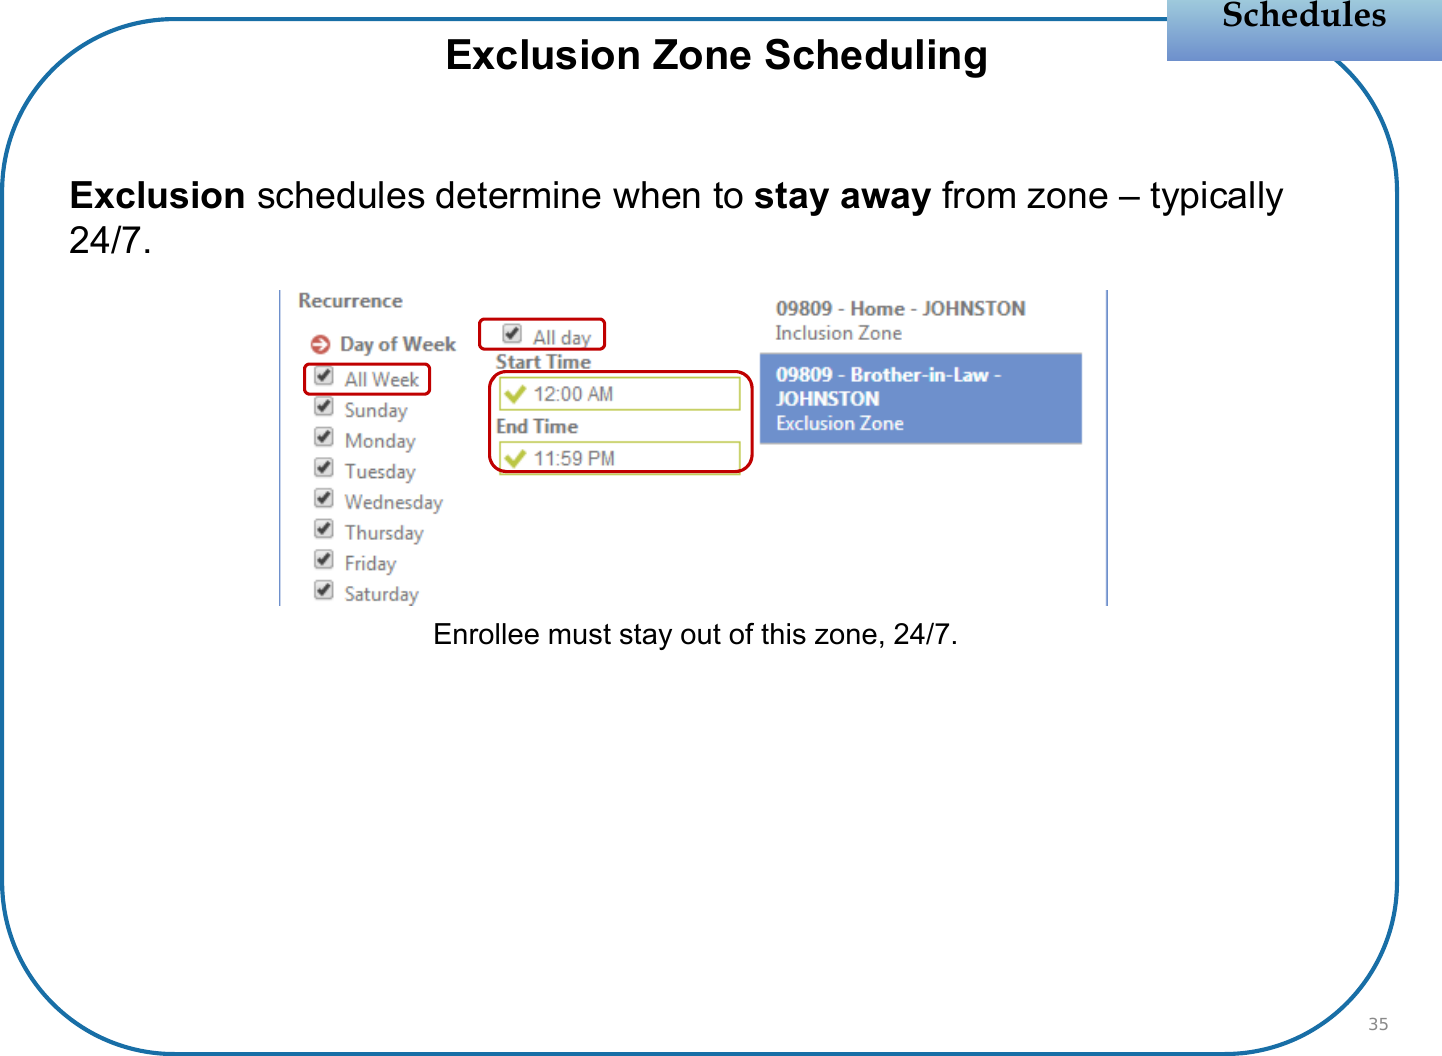 Exclusion Zone SchedulingExclusion schedules determine when to stay away from zone – typically 24/7.Enrollee must stay out of this zone, 24/7.SchedulesSchedules35